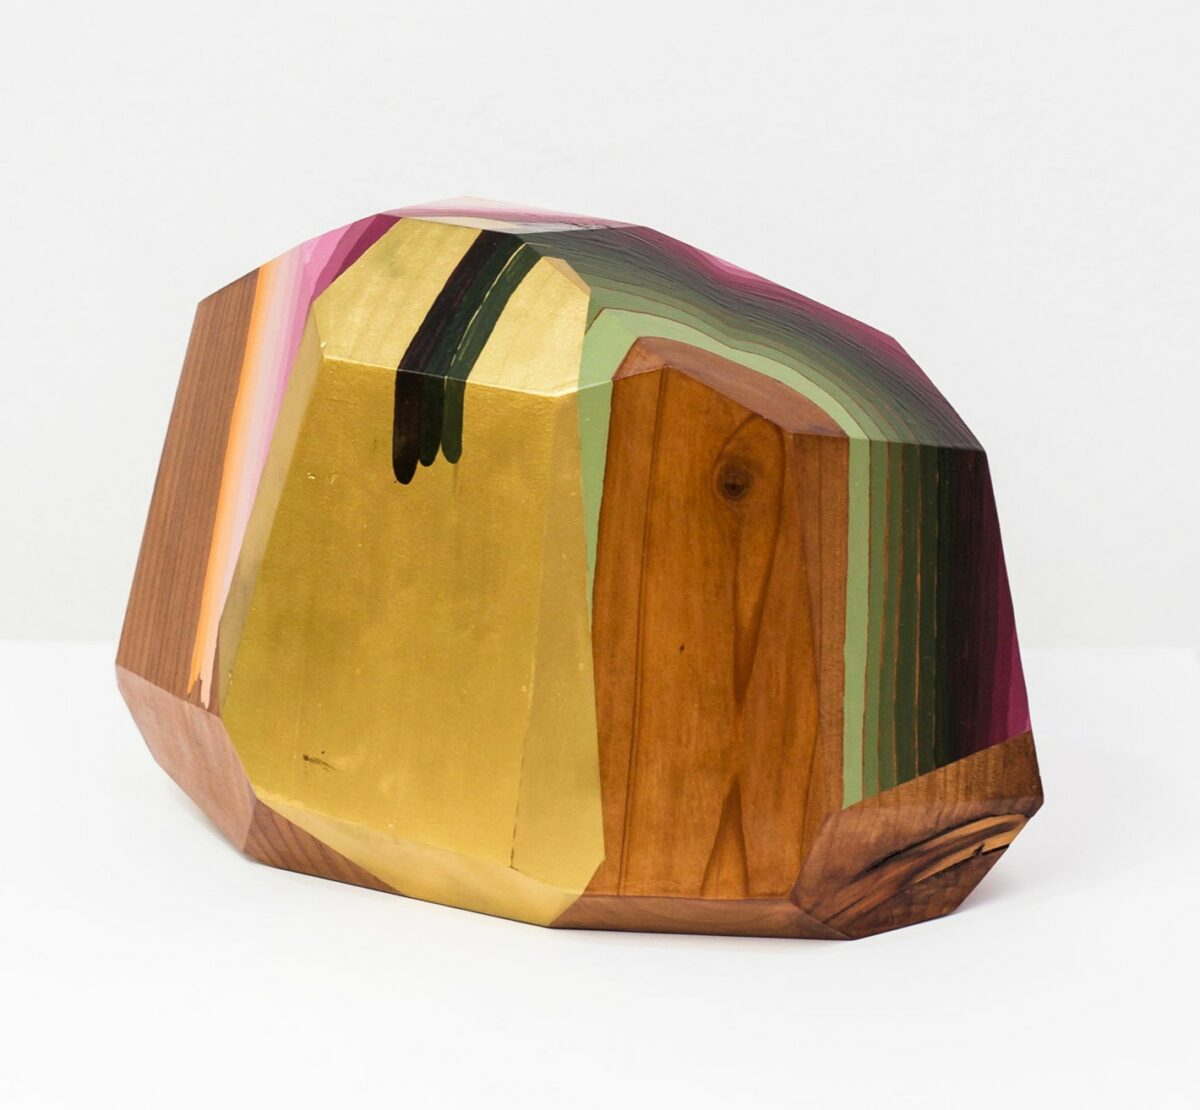 Wood Gemstones Colorful Abstract Sculptures By Victoria Wagner (4)